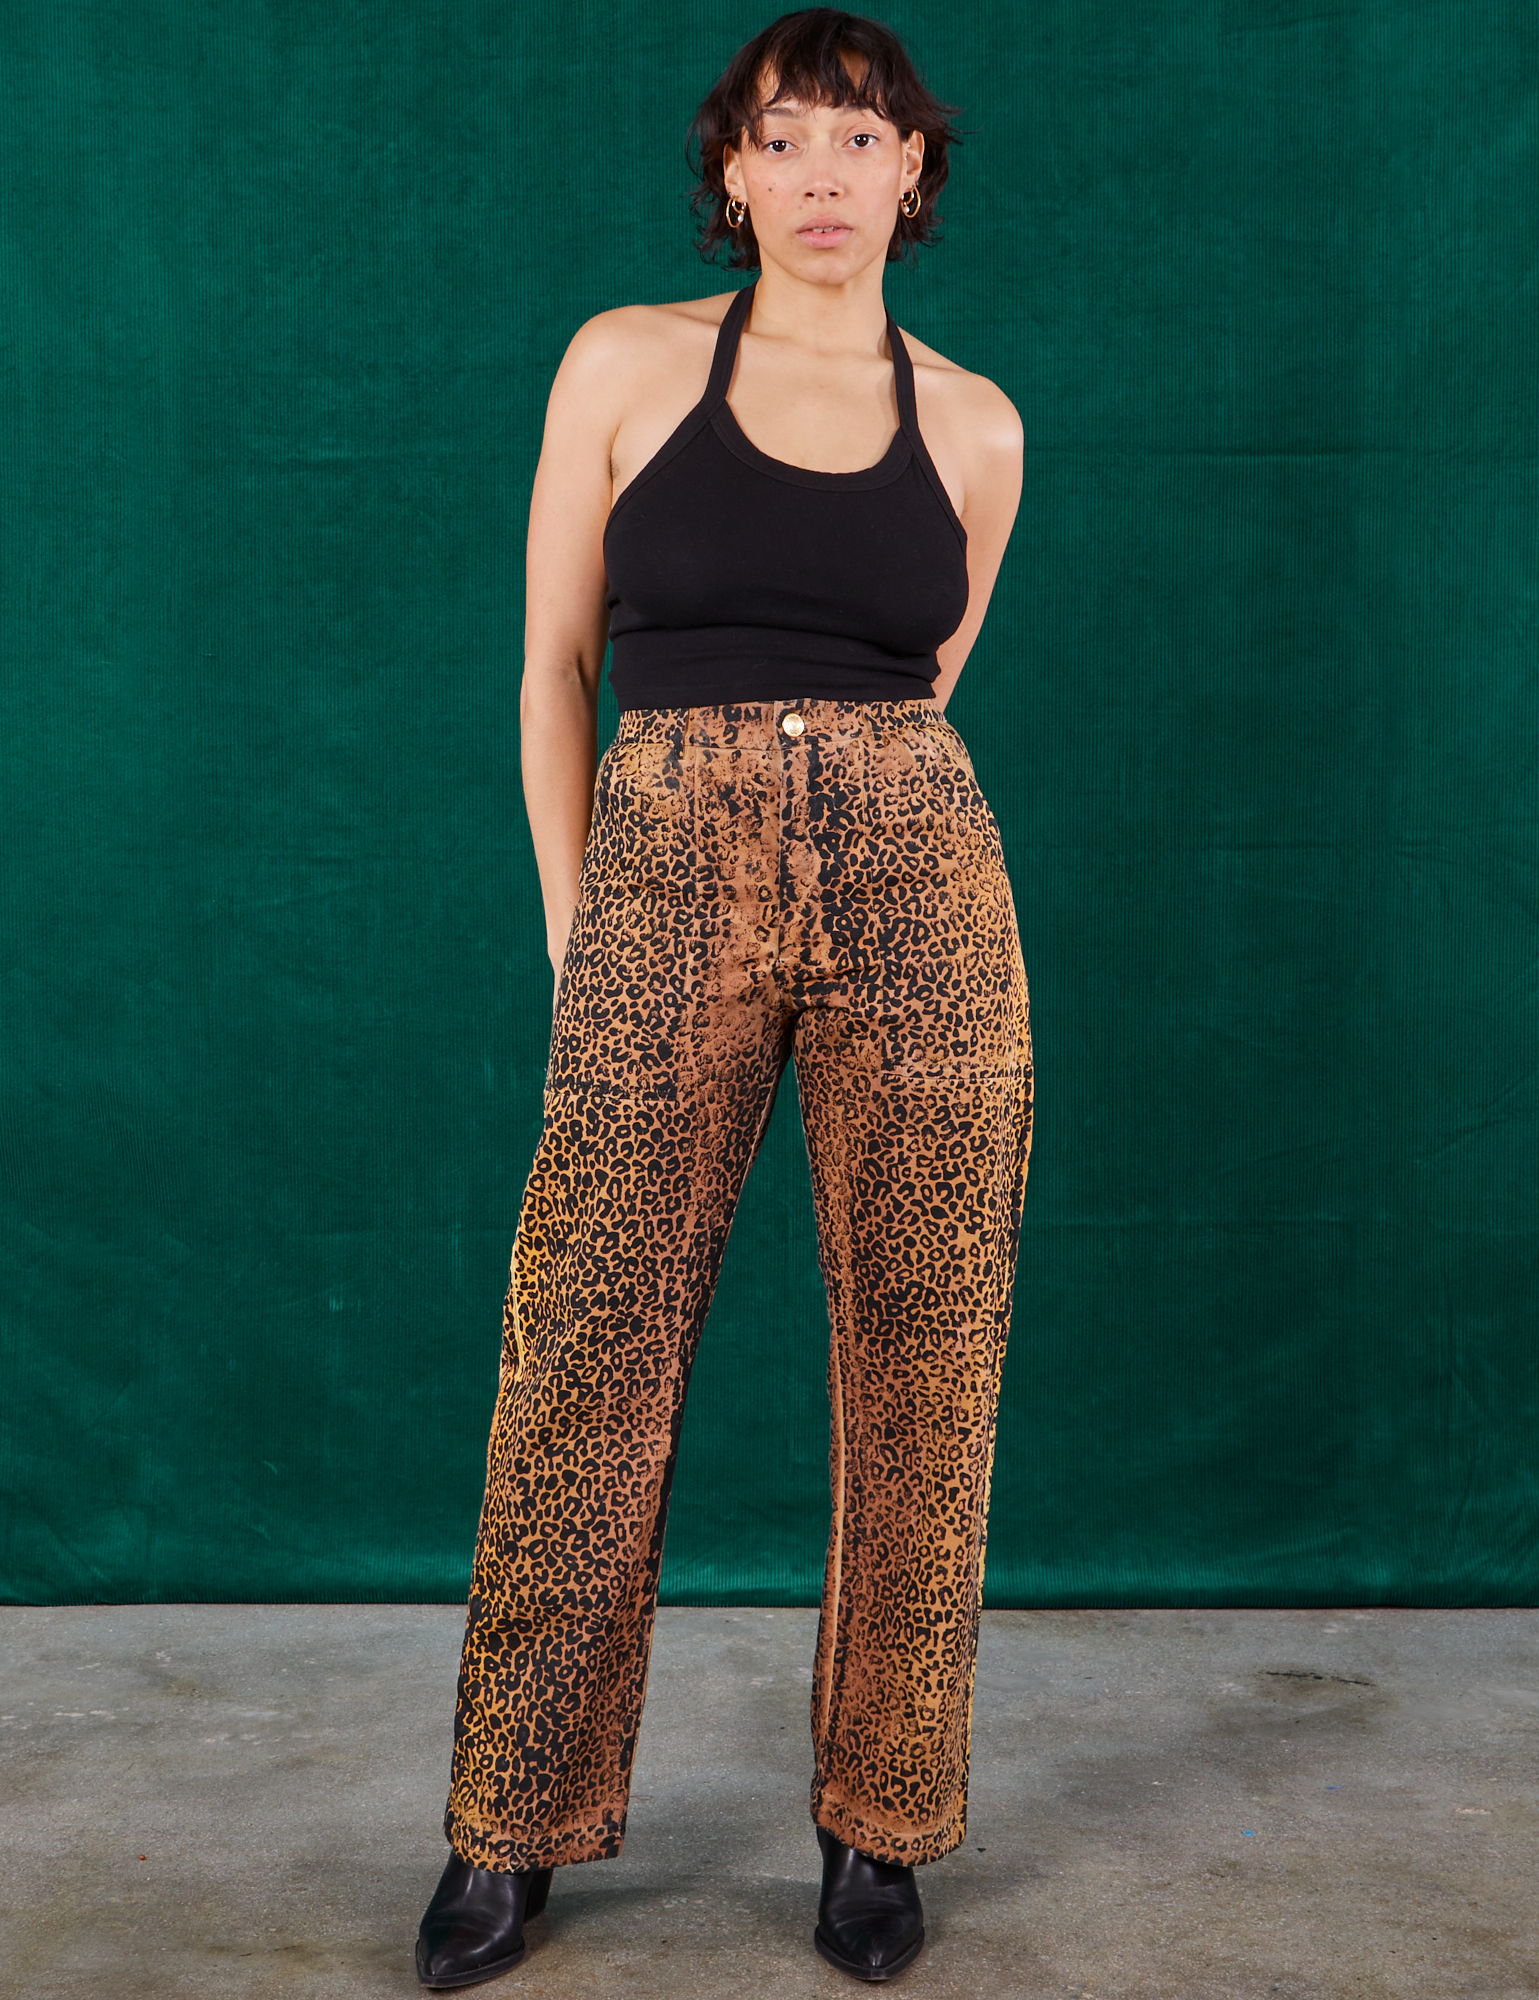 Tiara is 5'4" and wearing S Leopard Work Pants paired with black Halter Top